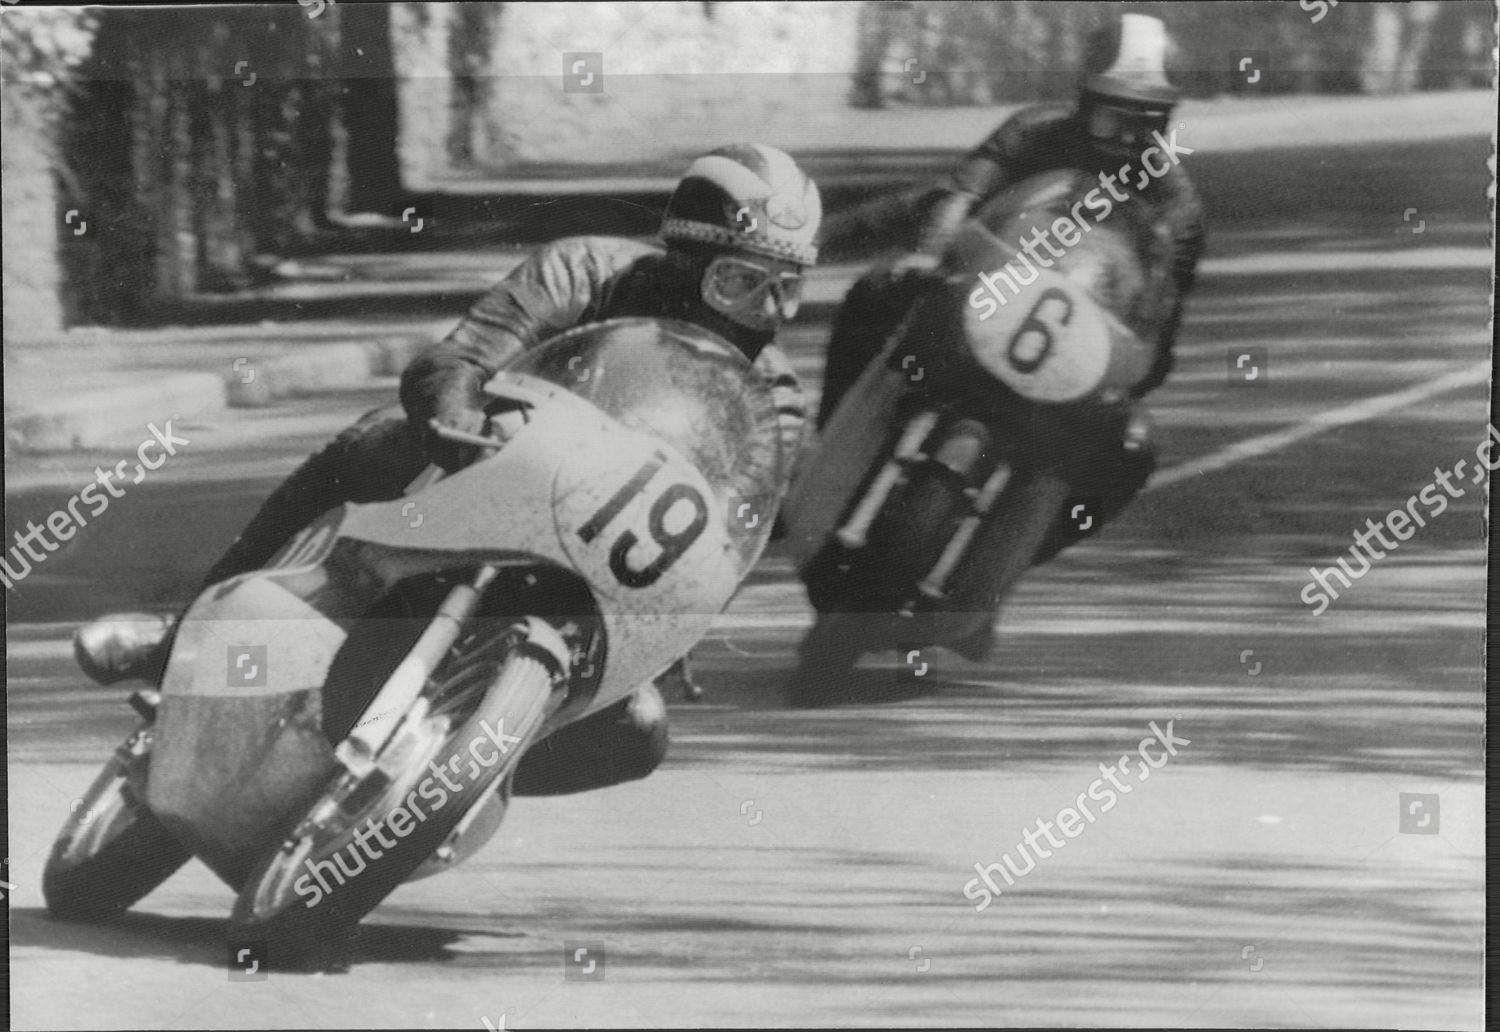 phil read motorcycle racer